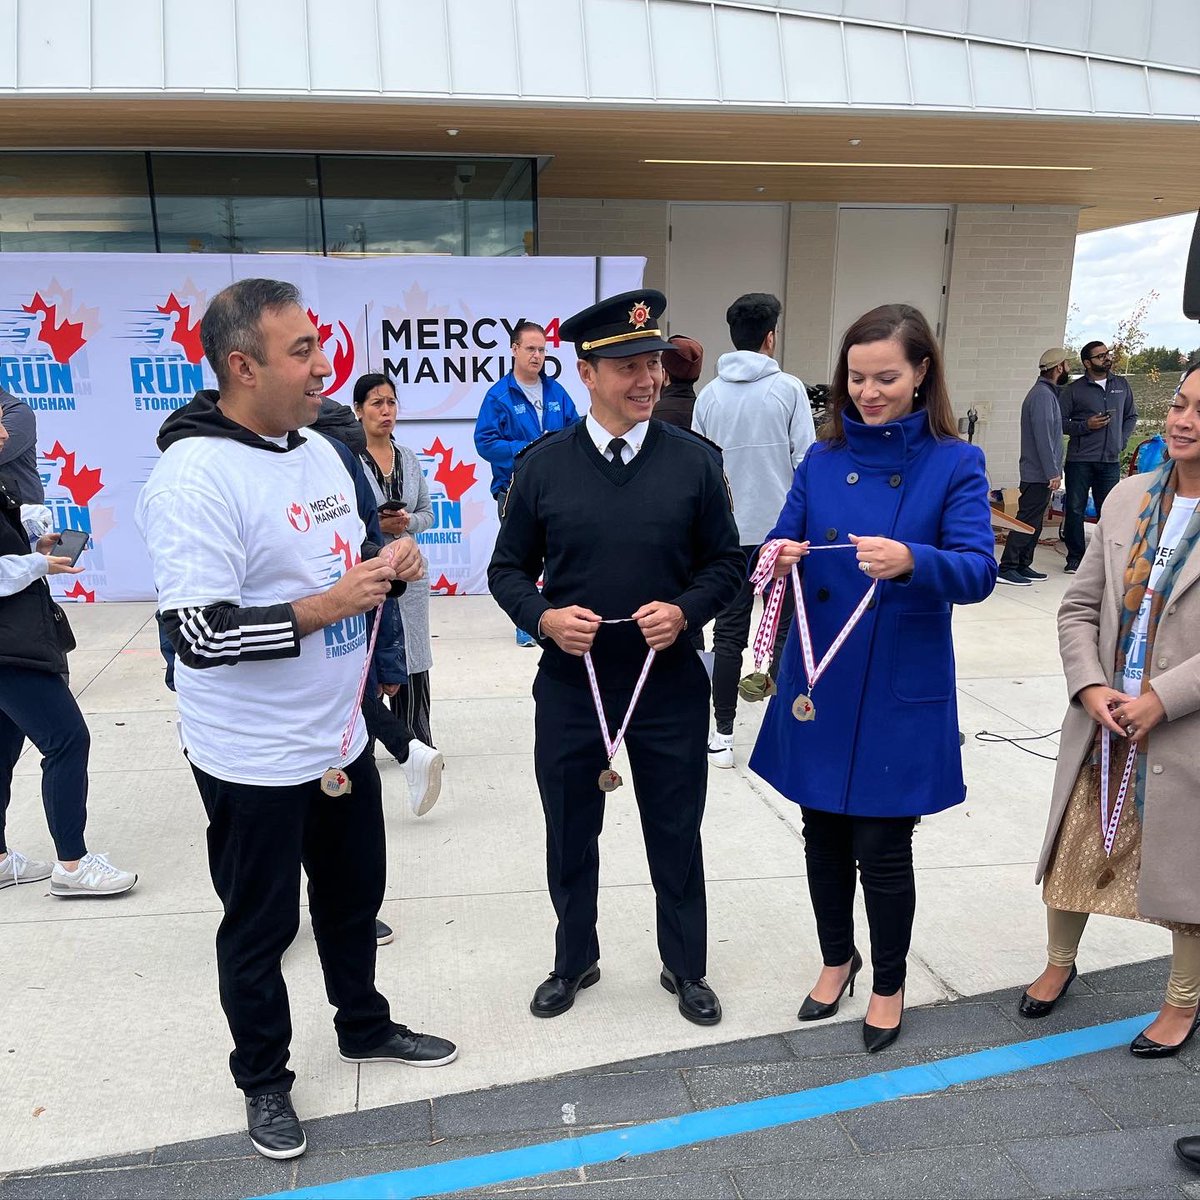 I enjoyed spending time with my colleagues in Mississauga for the 3rd annual Run for Mississauga! This extraordinary event brought the community together but also raised funds to donate to the THP foundation! A big thank you to @AMYAMississauga volunteers & participants!